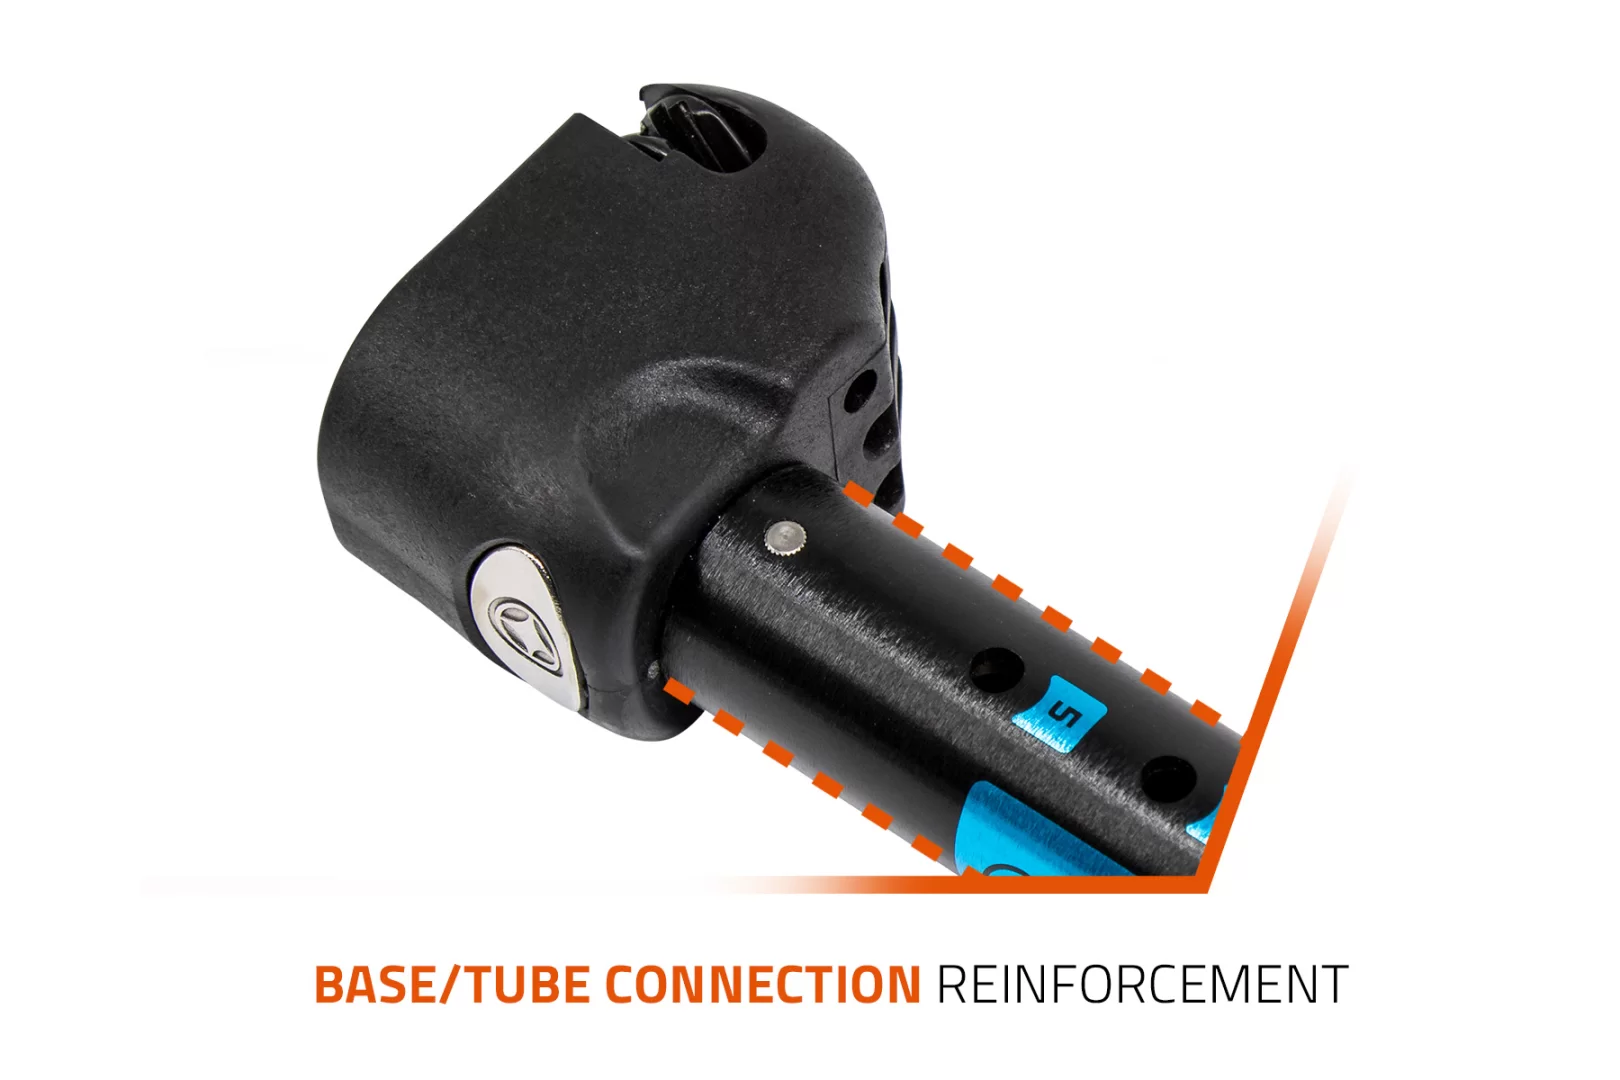 Base / Tube Connection Reinforcement